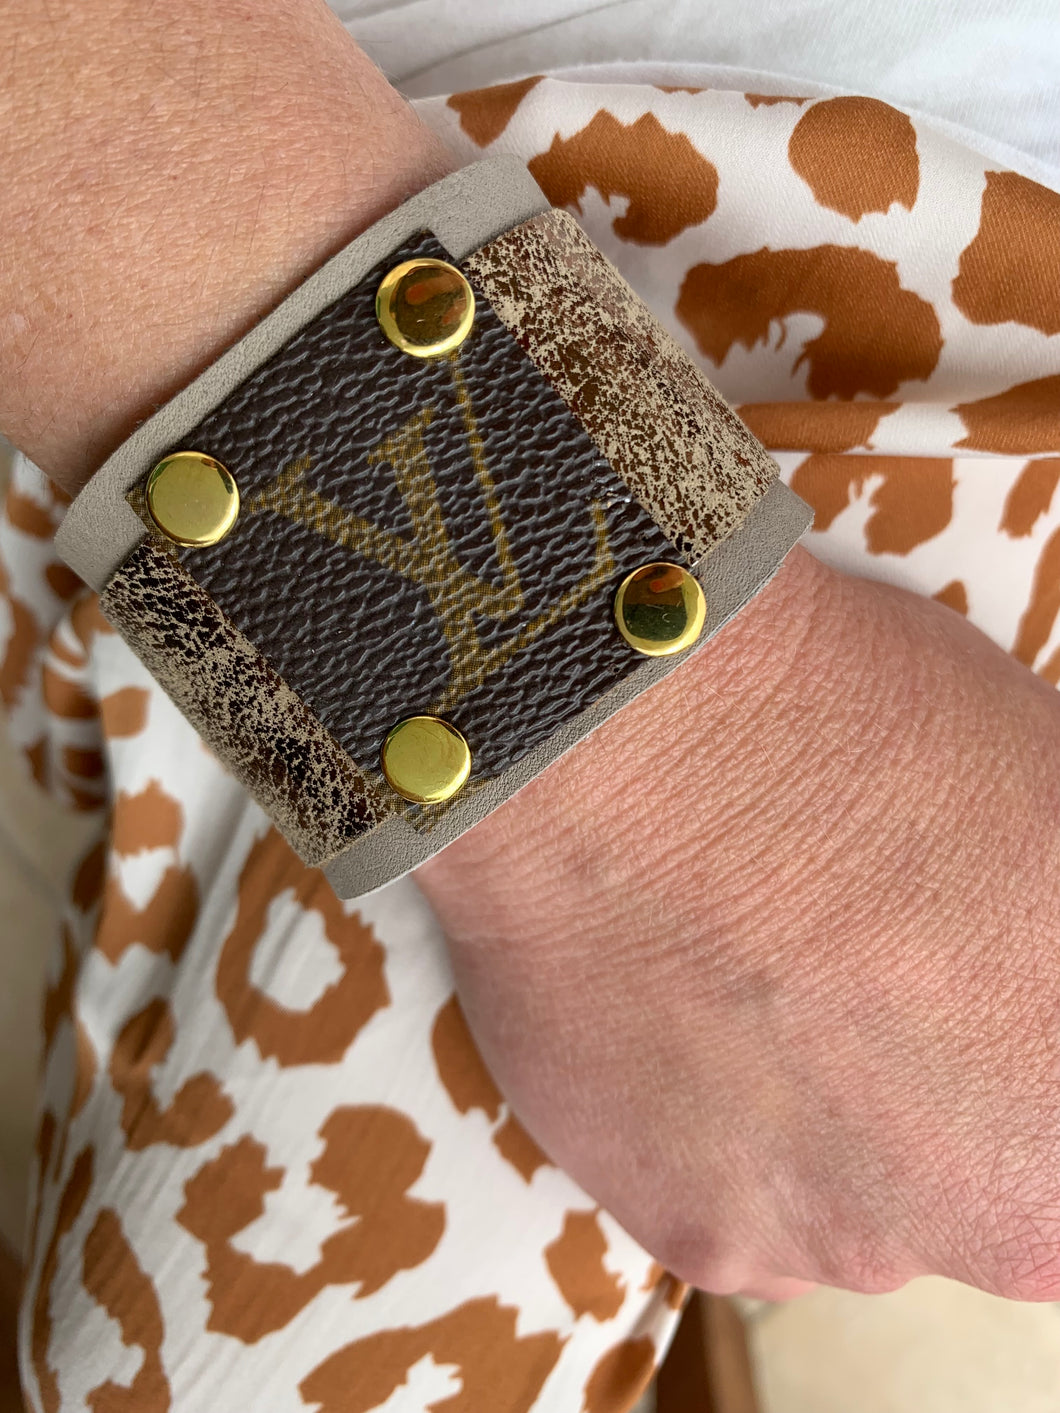 Beautiful leather cuff crafted from cloud gray Deerskin, featuring a metallic leather overlay and vintage LV canvas square accent.